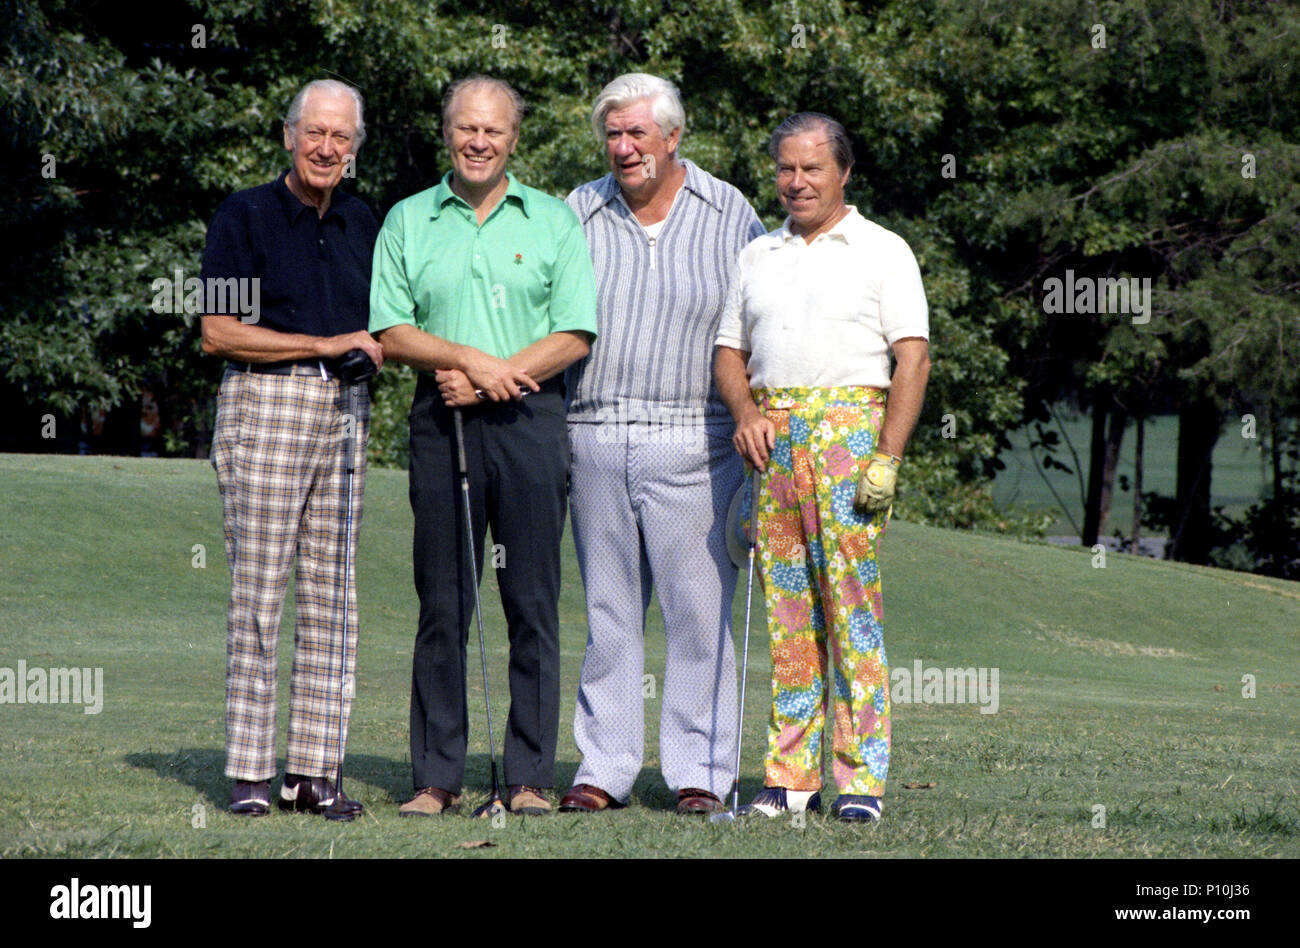 1974, September 16 – Andrews Air Force Base Golf Course – Andrews Air Force Base, MD – Gerald R. Ford, Representatives John Rhodes, Leslie Arends, Thomas P. “Tip” O'Neill– standing, posing – Third Annual Congressional Golf Tournament; US Representatives from Illinois (IL), Arizona (AZ), Massachusetts (MA) - Andrews Air Force Base, Maryland Stock Photo